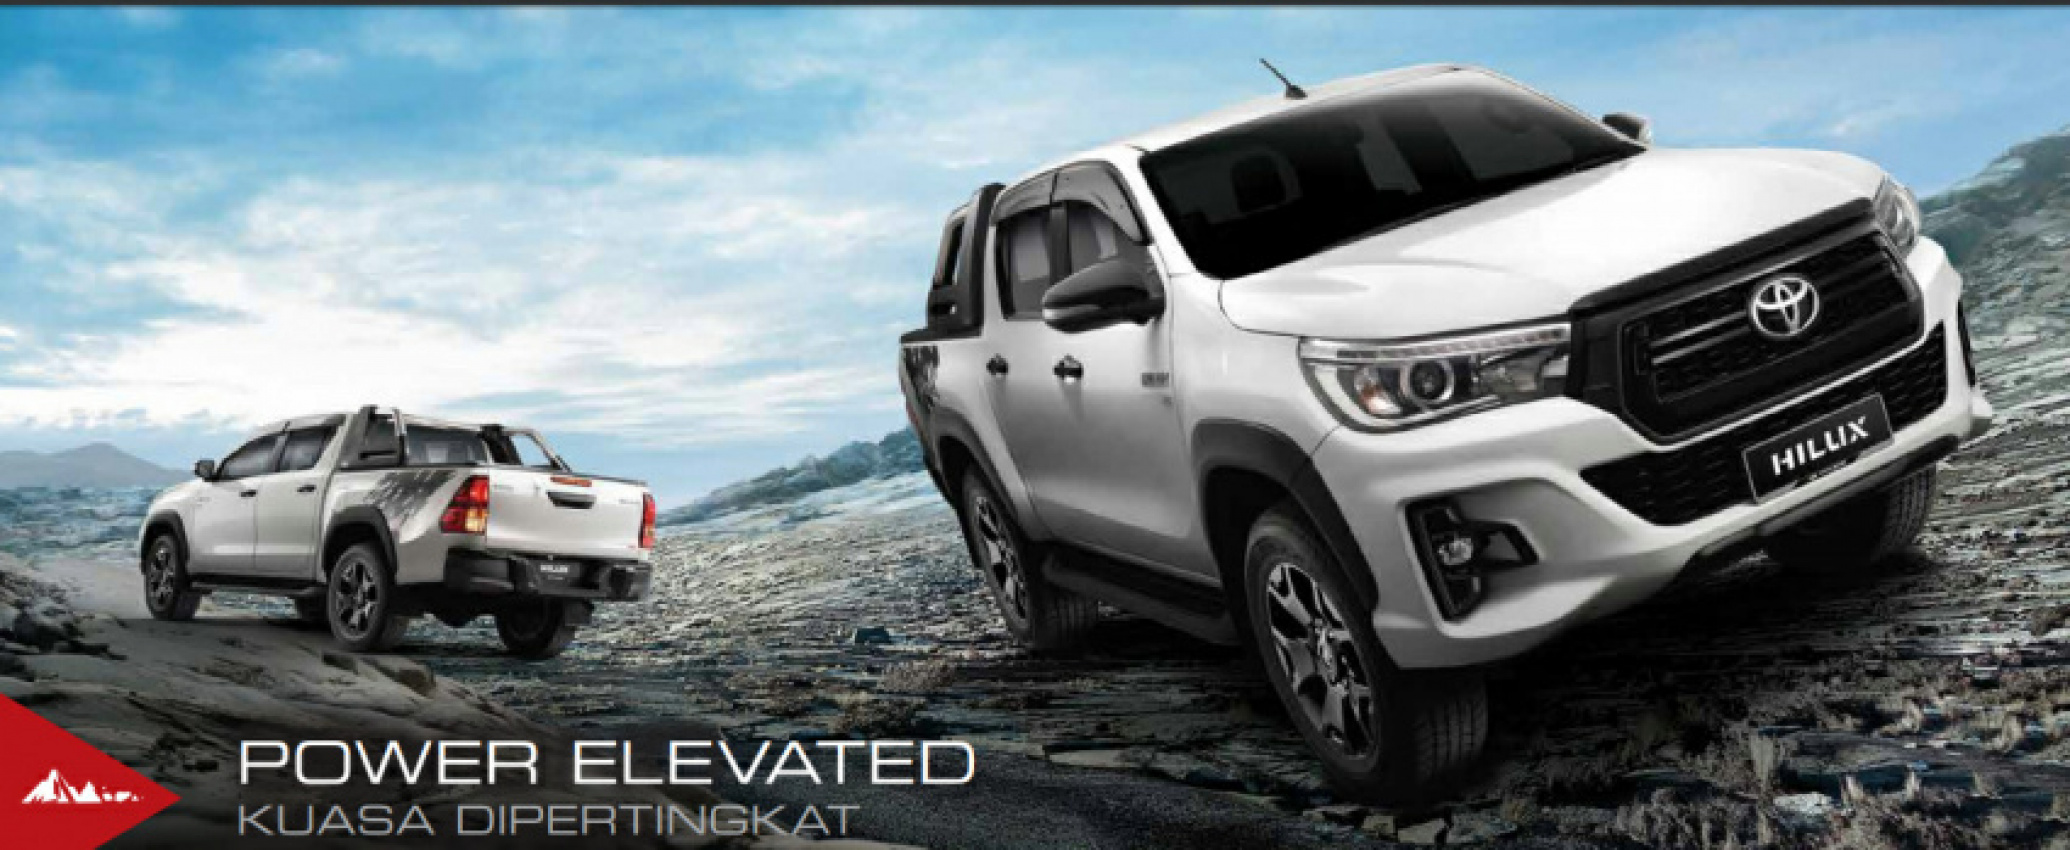 autos, car brands, cars, toyota, android, android auto, apple carplay, automotive, fortuner, malaysia, pick up truck, umw toyota, umw toyota motor, android, umw toyota motor introduces hilux black edition; upgrades for hilux, fortuner & innova ranges